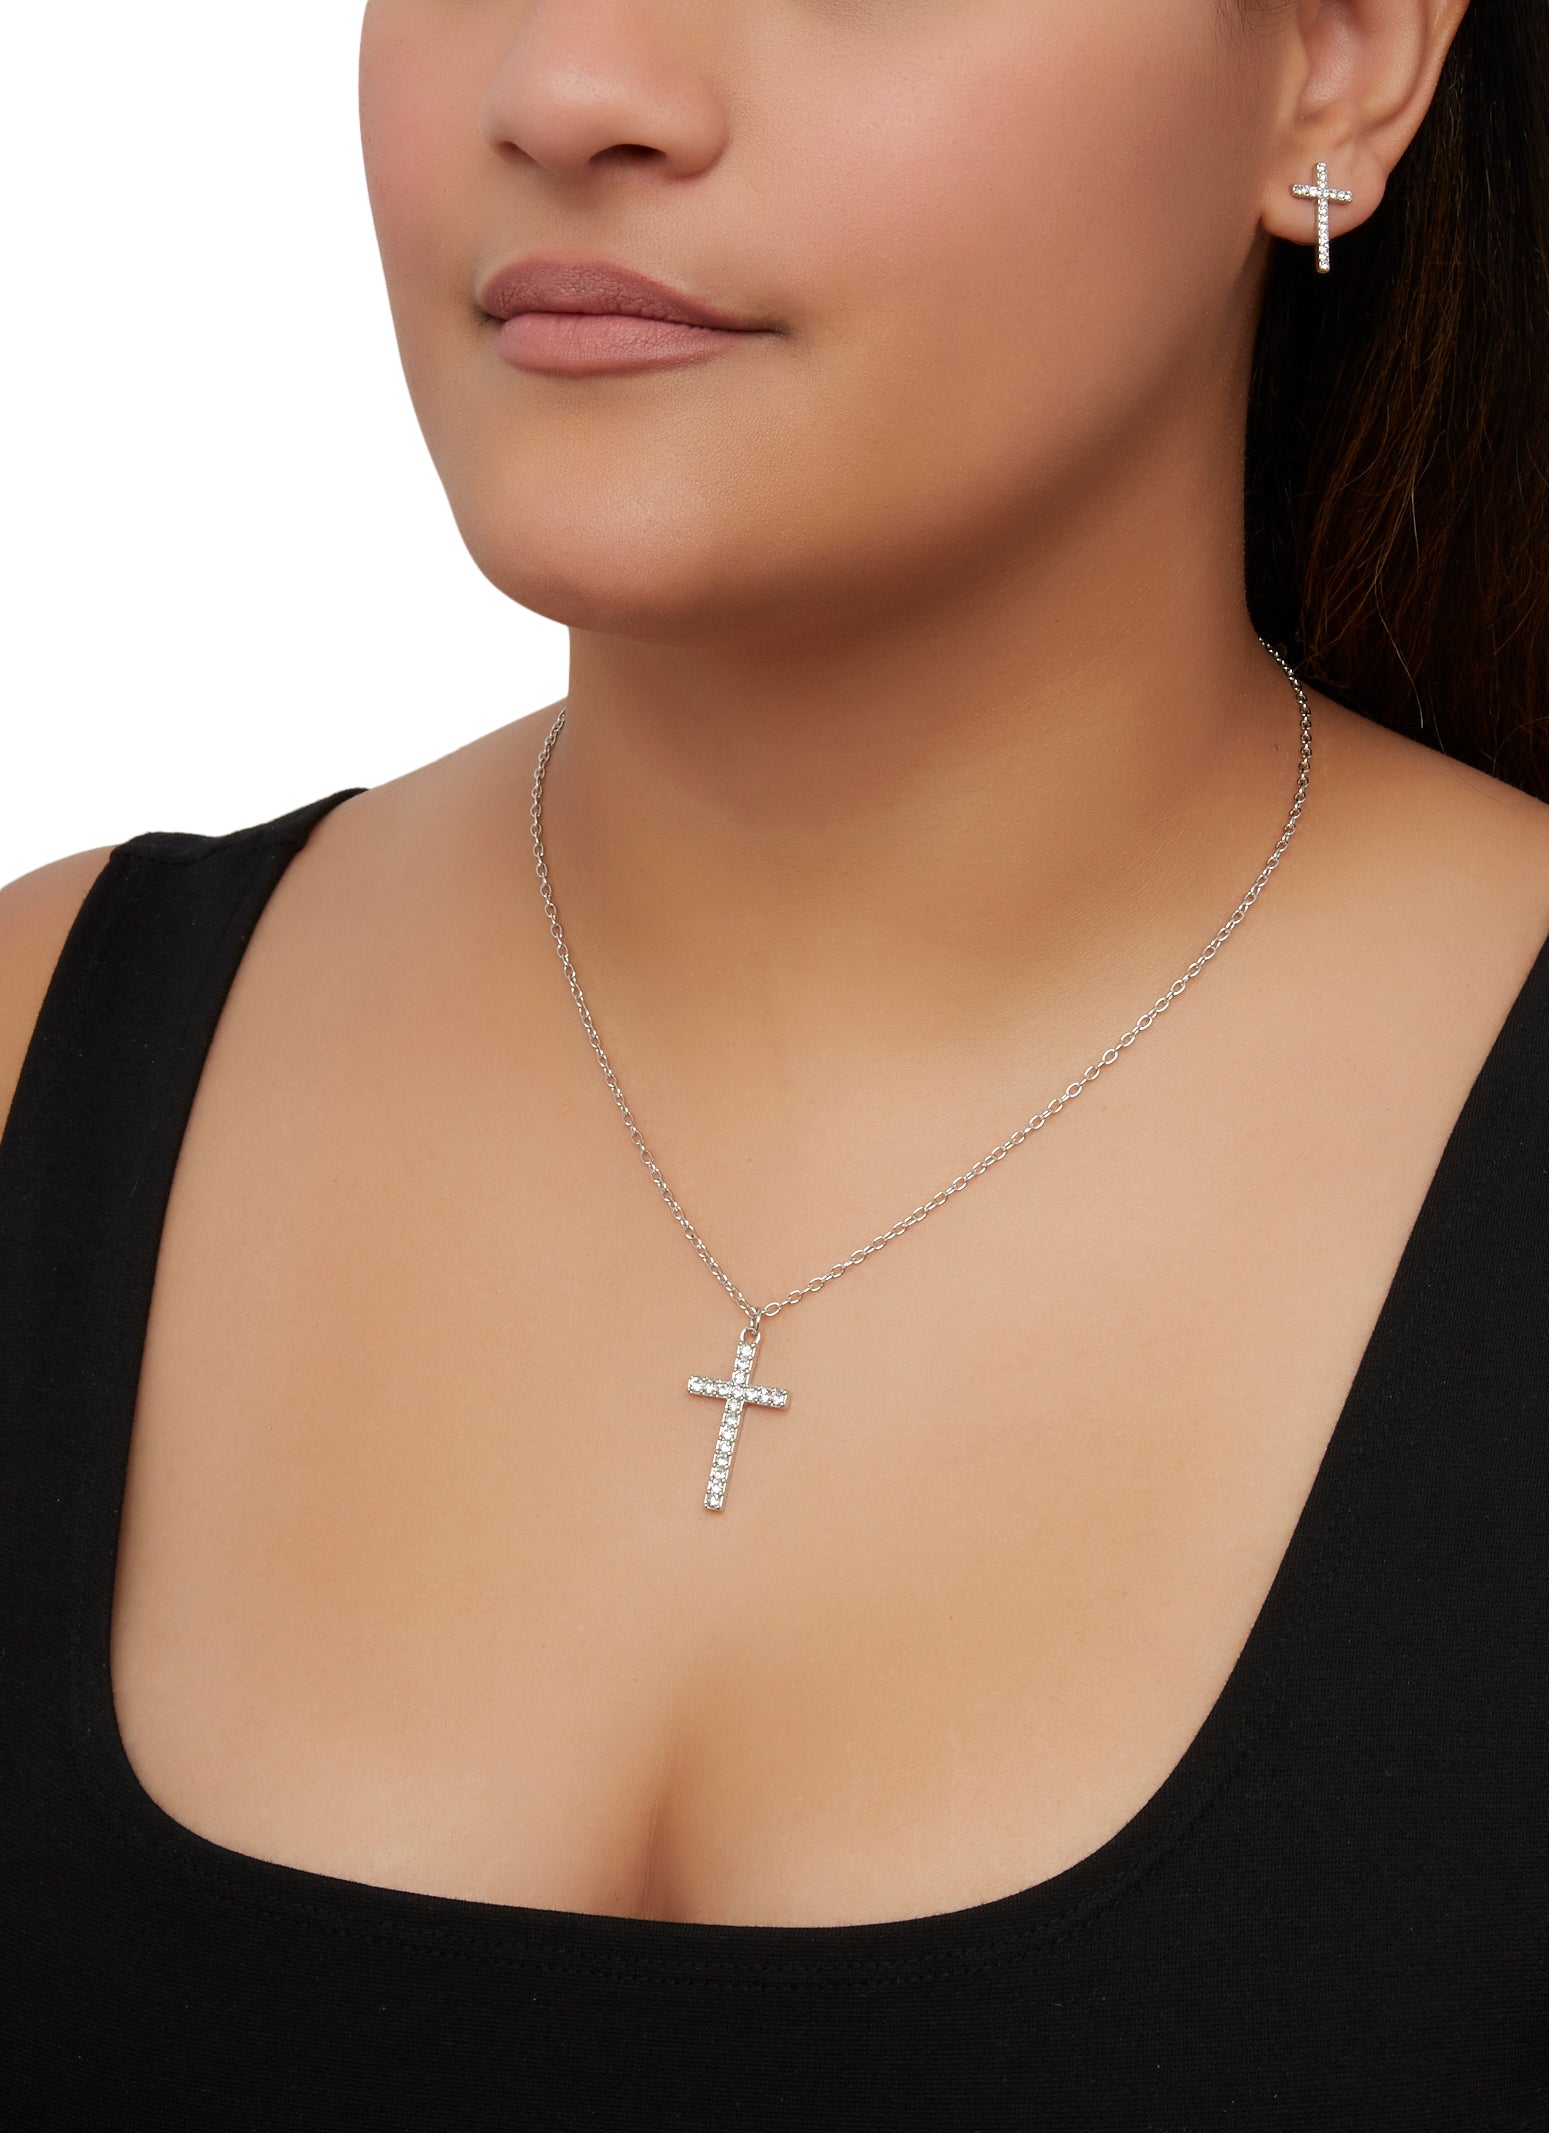 Anglacesmade Layered Choker Necklace Cross Necklace Rhinestone Cross Charm Pendant  Necklace Bohemia Jewelry for Women and Girls(Silver) : Amazon.in: Jewellery